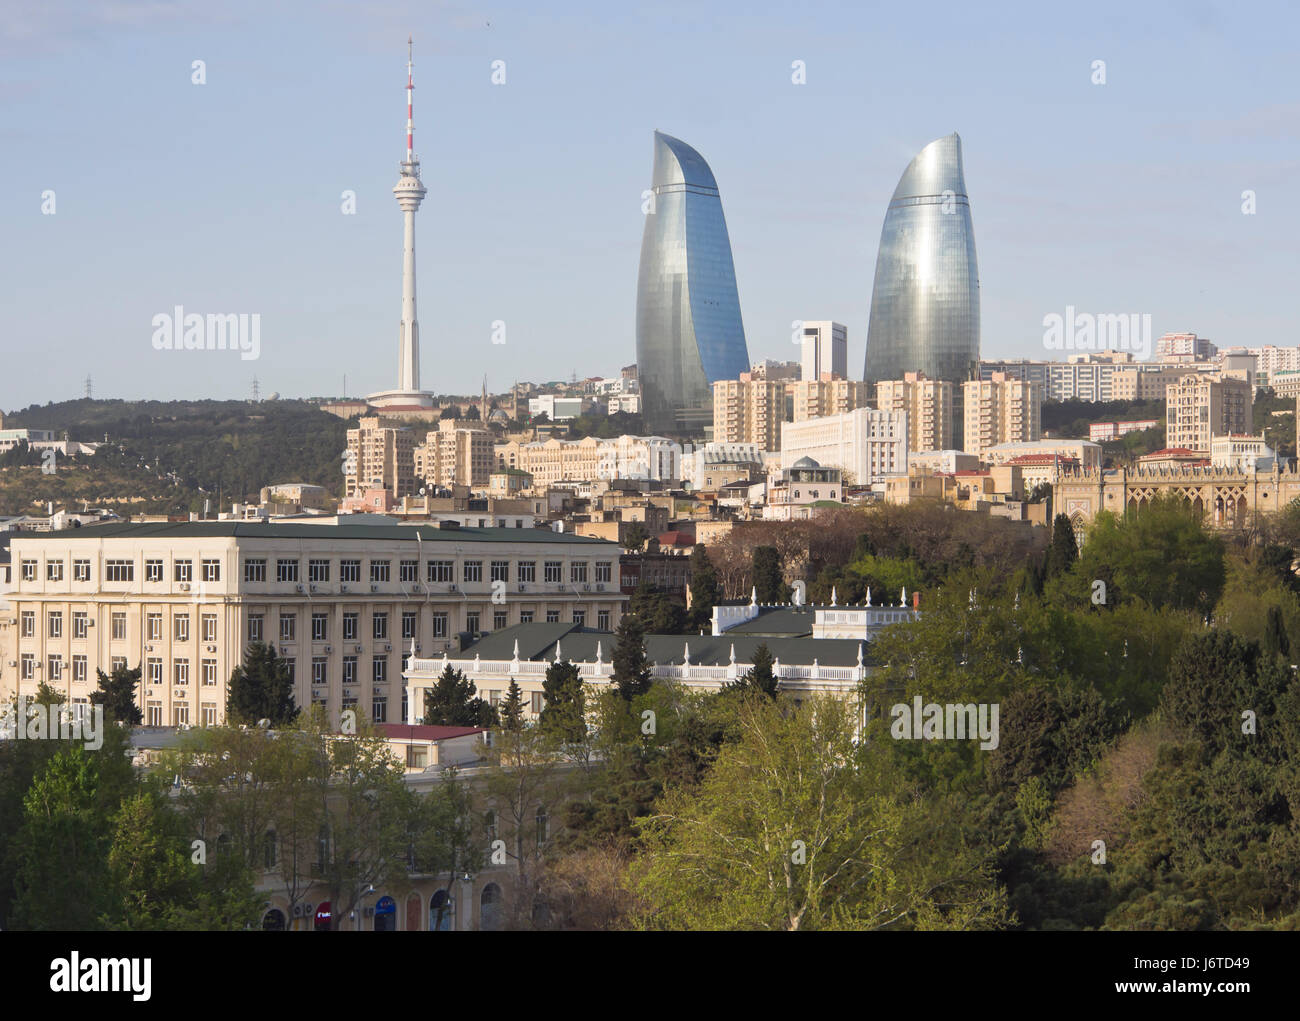 Flame towers skyscrapers and TV-tower in Baku Azerbaijan, a towering landmark of modern architecture Stock Photo